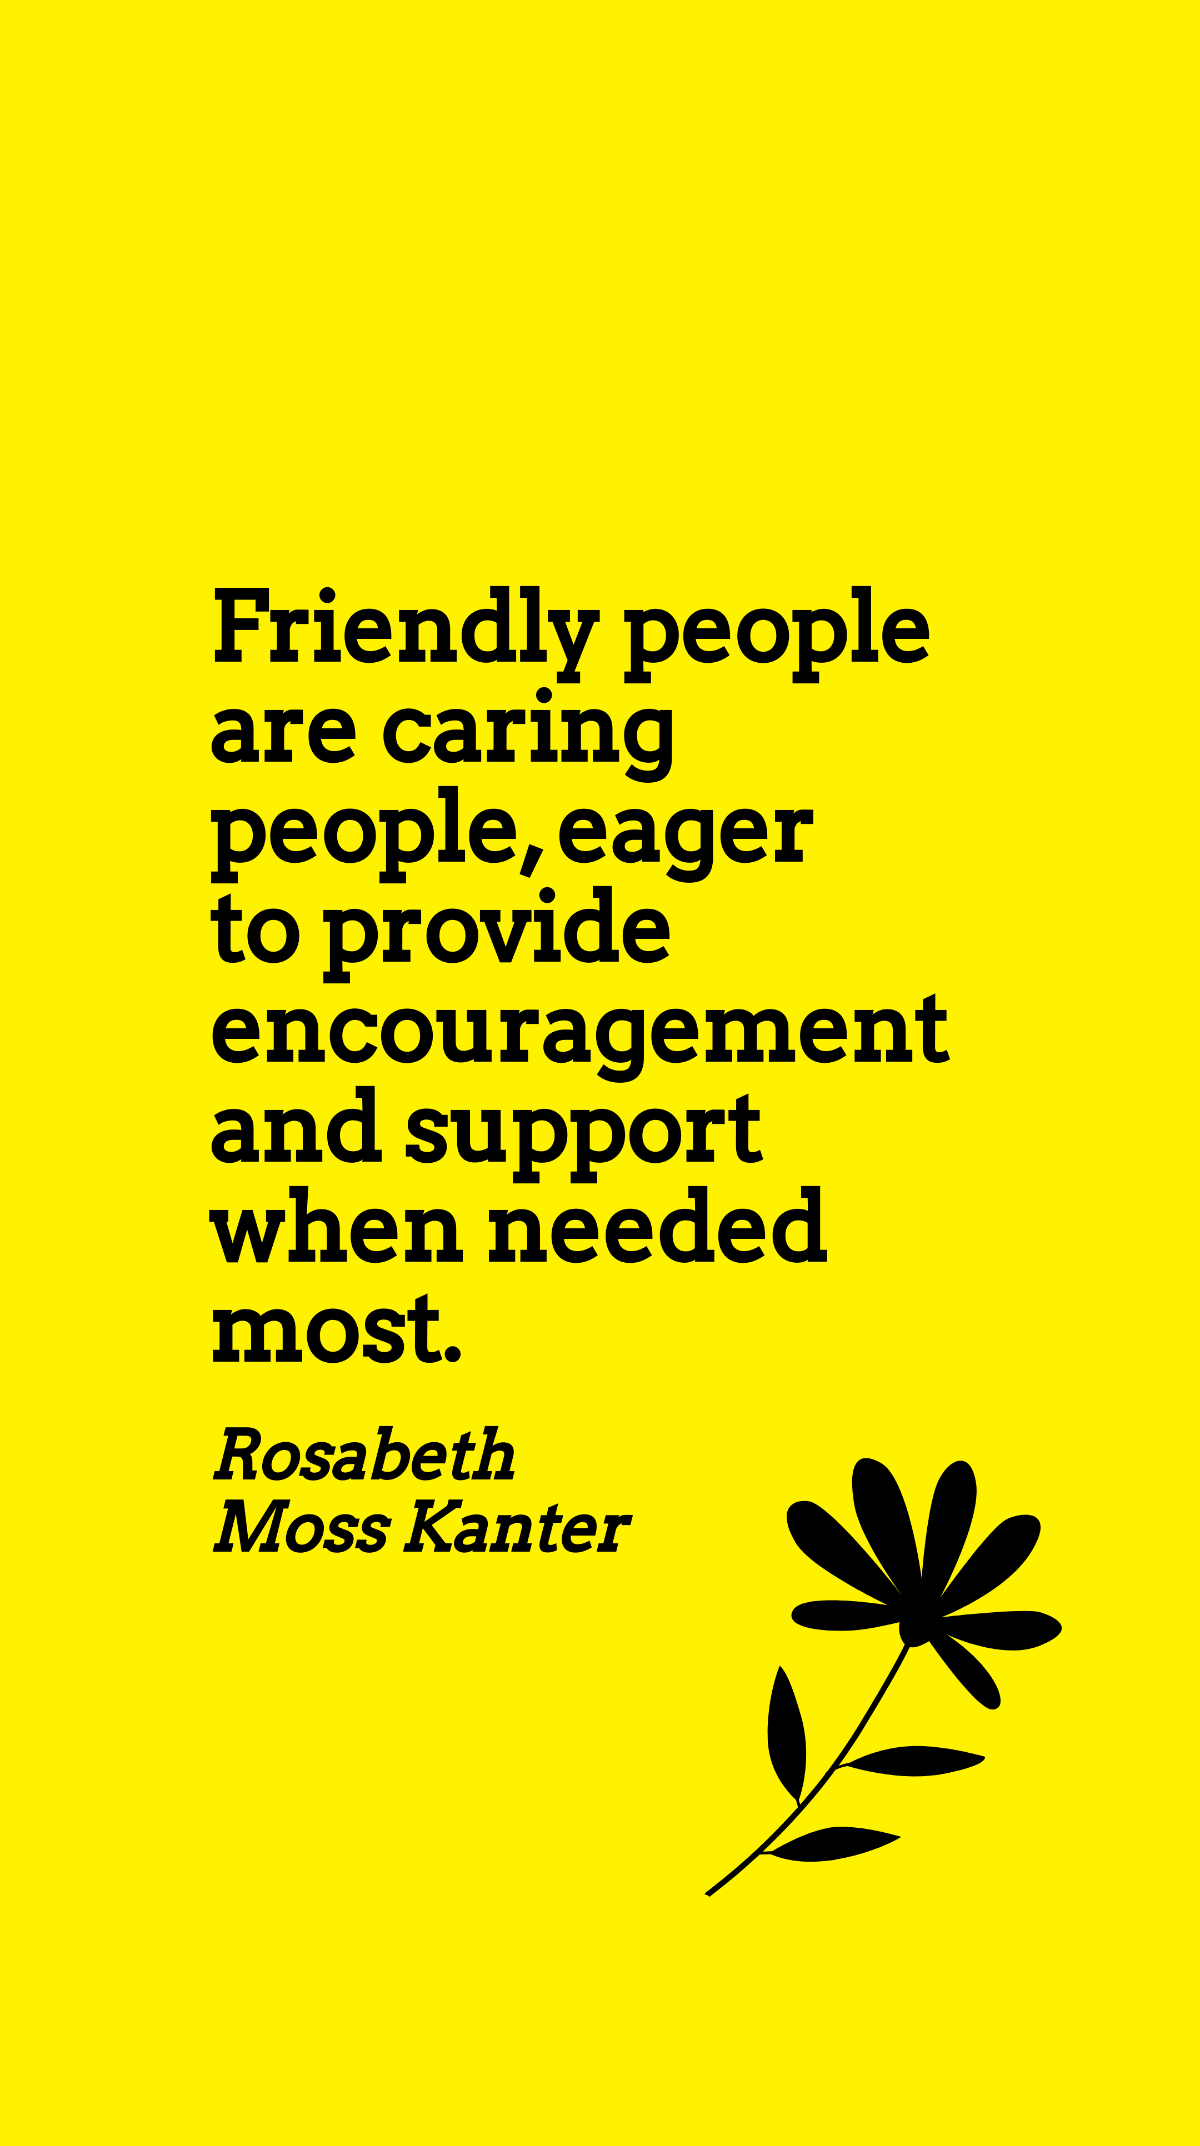 Rosabeth Moss Kanter - Friendly people are caring people, eager to provide encouragement and support when needed most. Template